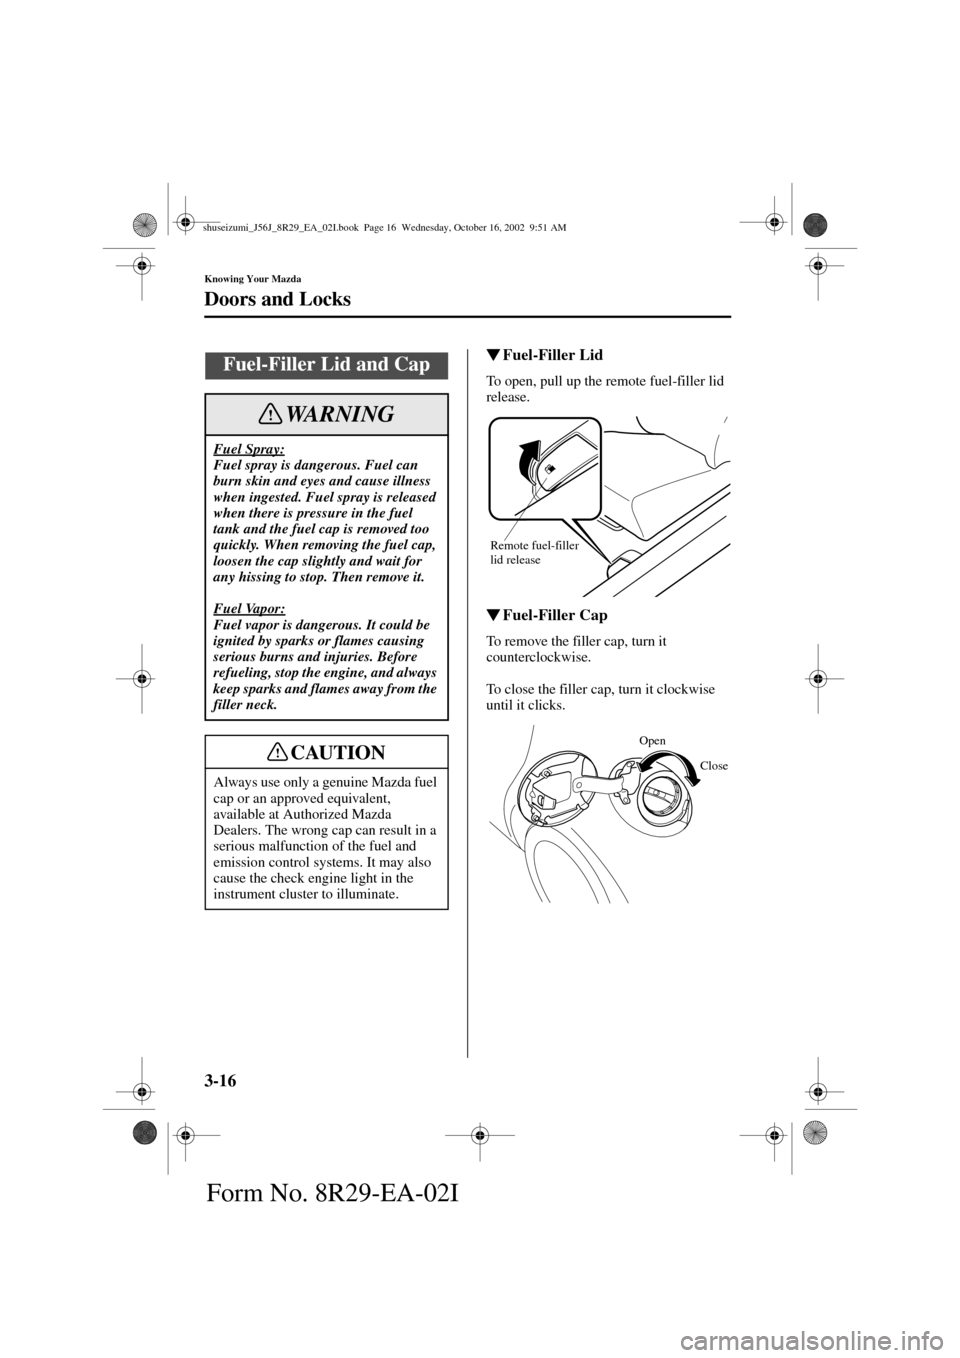 MAZDA MODEL 6 2003  Owners Manual (in English) 3-16
Knowing Your Mazda
Doors and Locks
Form No. 8R29-EA-02I
Fuel-Filler Lid
To open, pull up the remote fuel-filler lid 
release.
Fuel-Filler Cap
To remove the filler cap, turn it 
counterclockwise